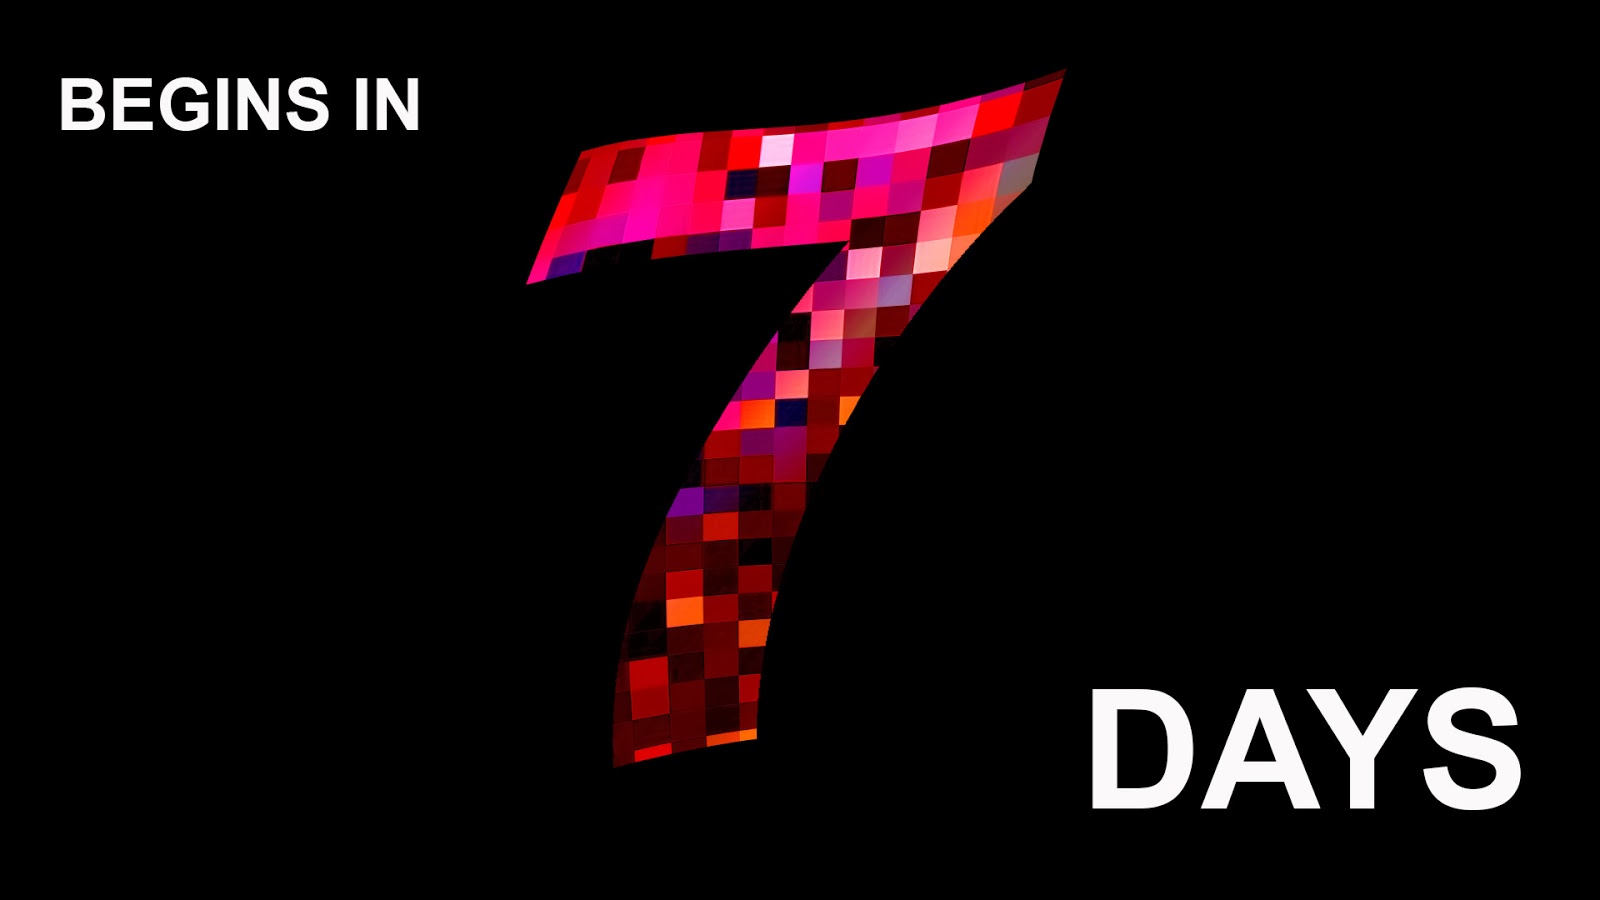 An Image A Day..: 7 Days to go